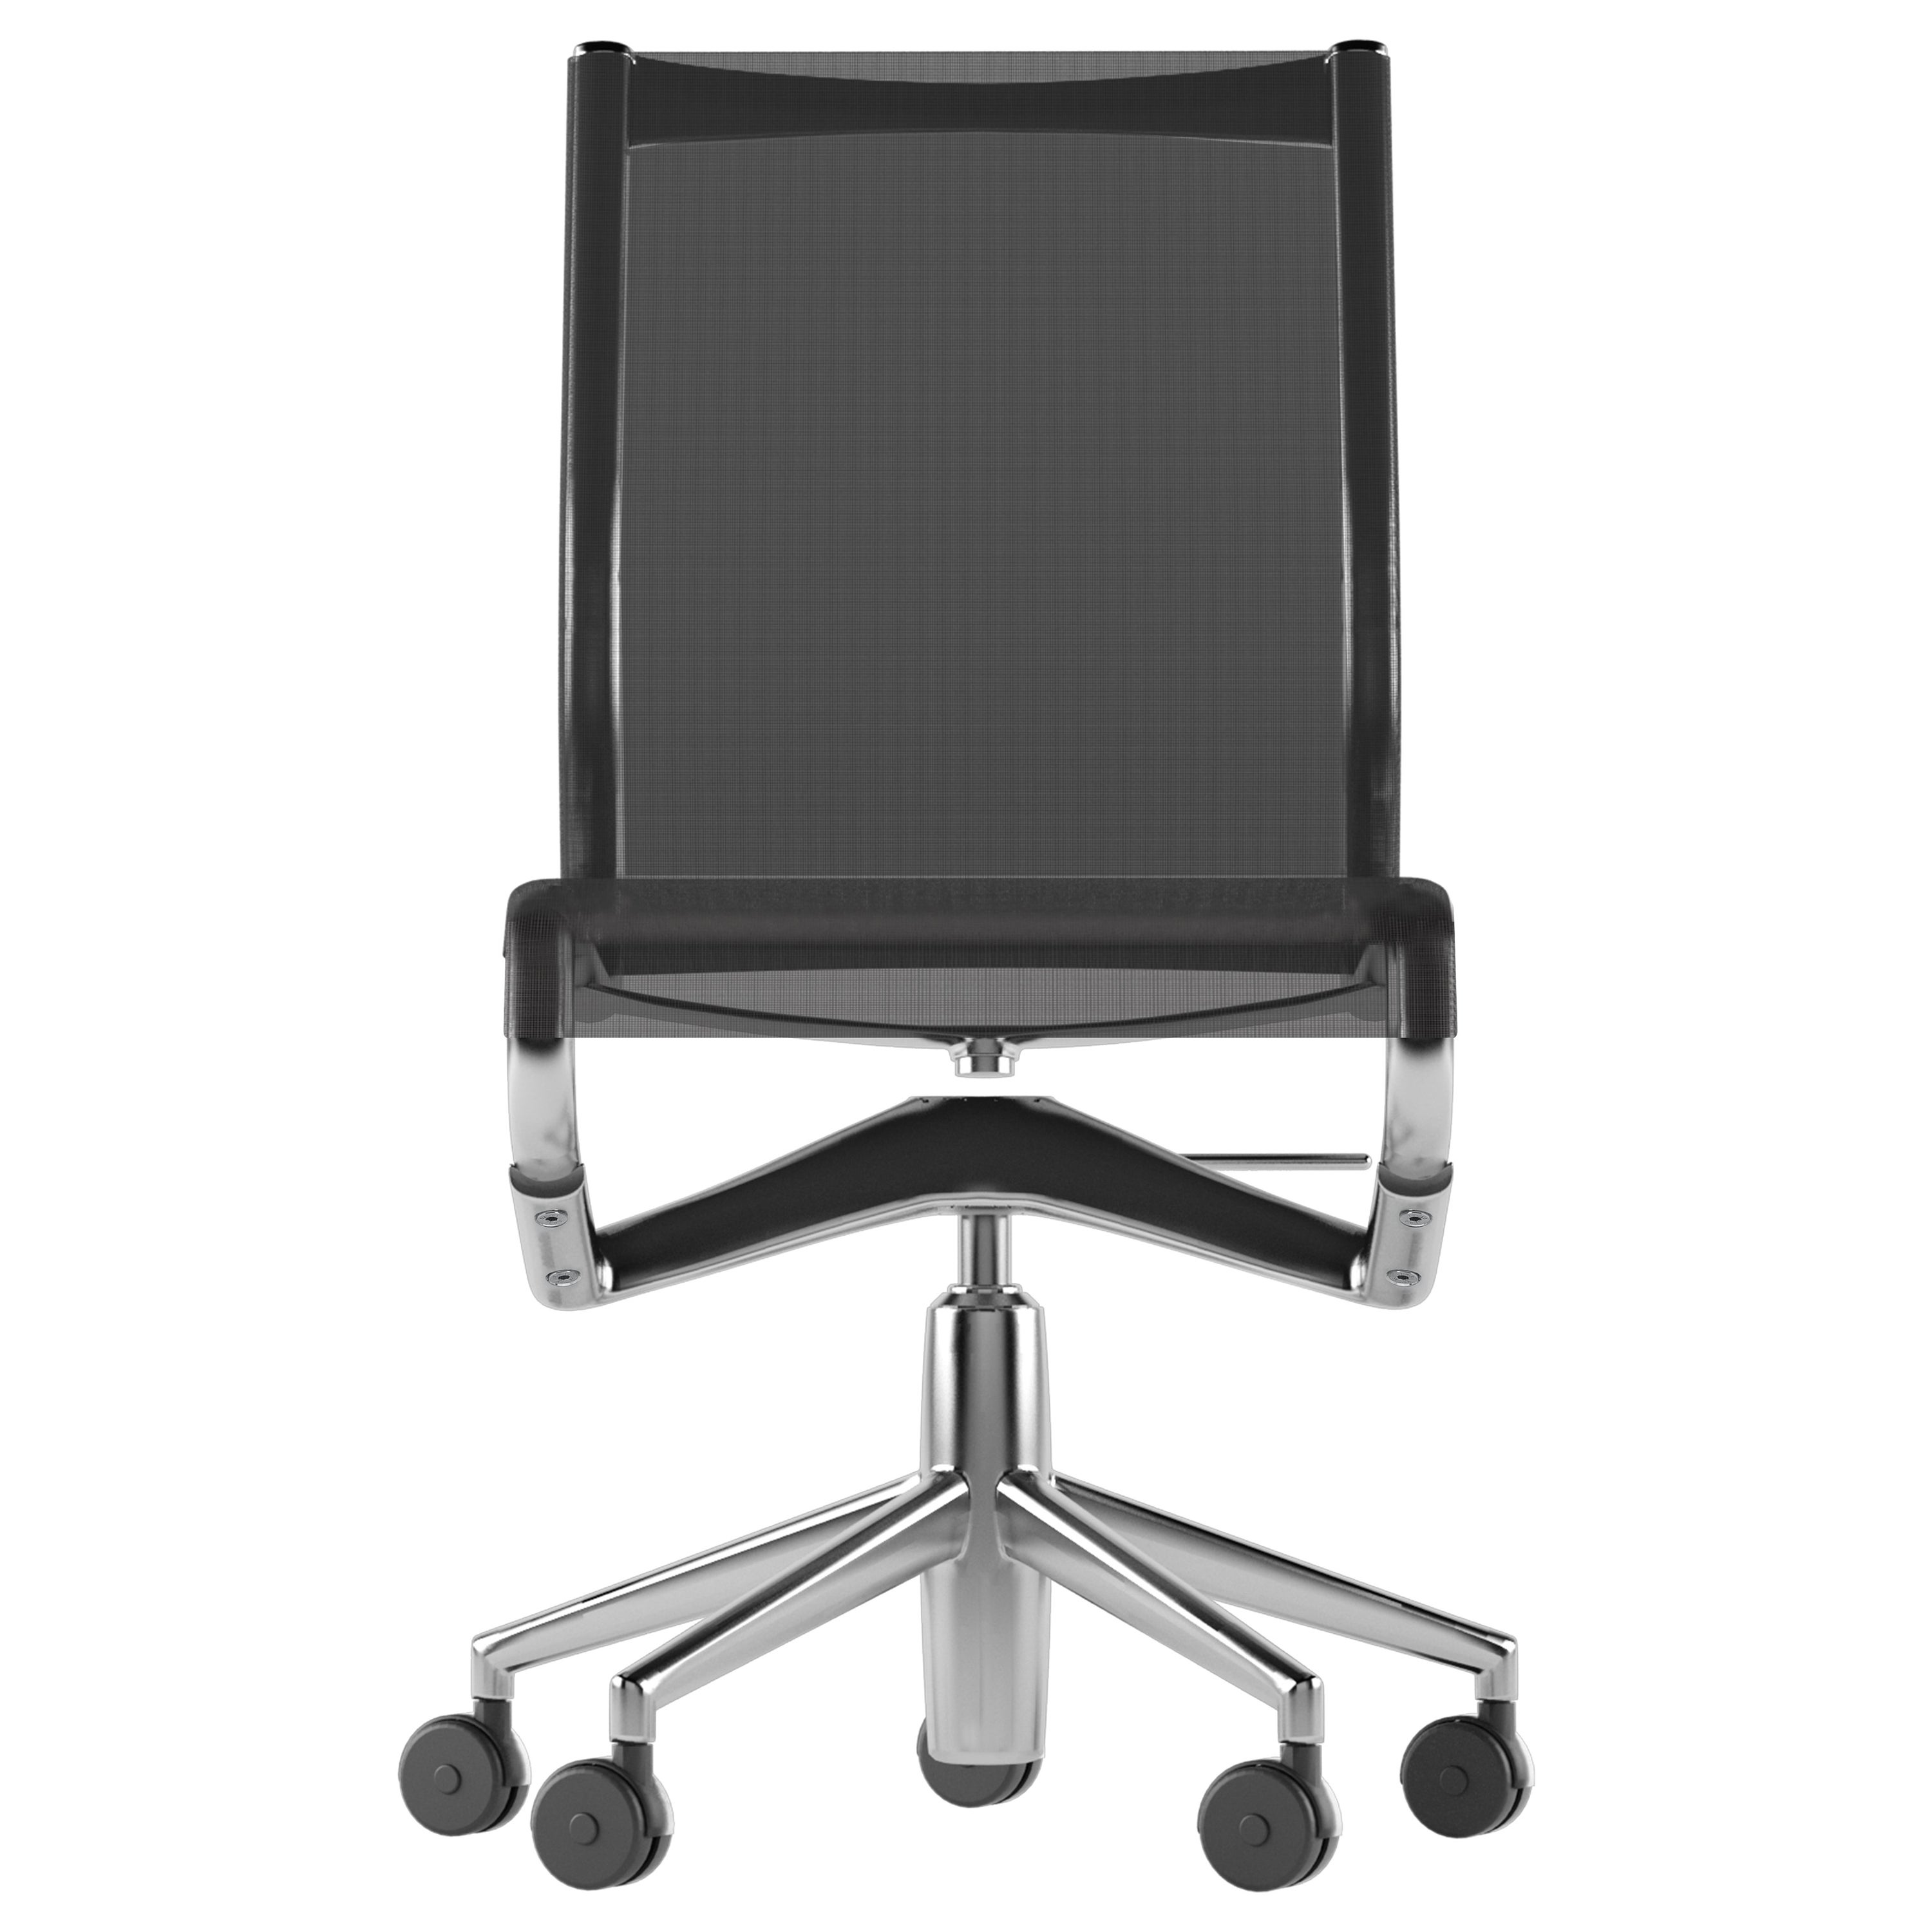 Alias 432 Rollingframe 44 Chair in Metallic Grey Mesh and Chromed Aluminum Frame For Sale